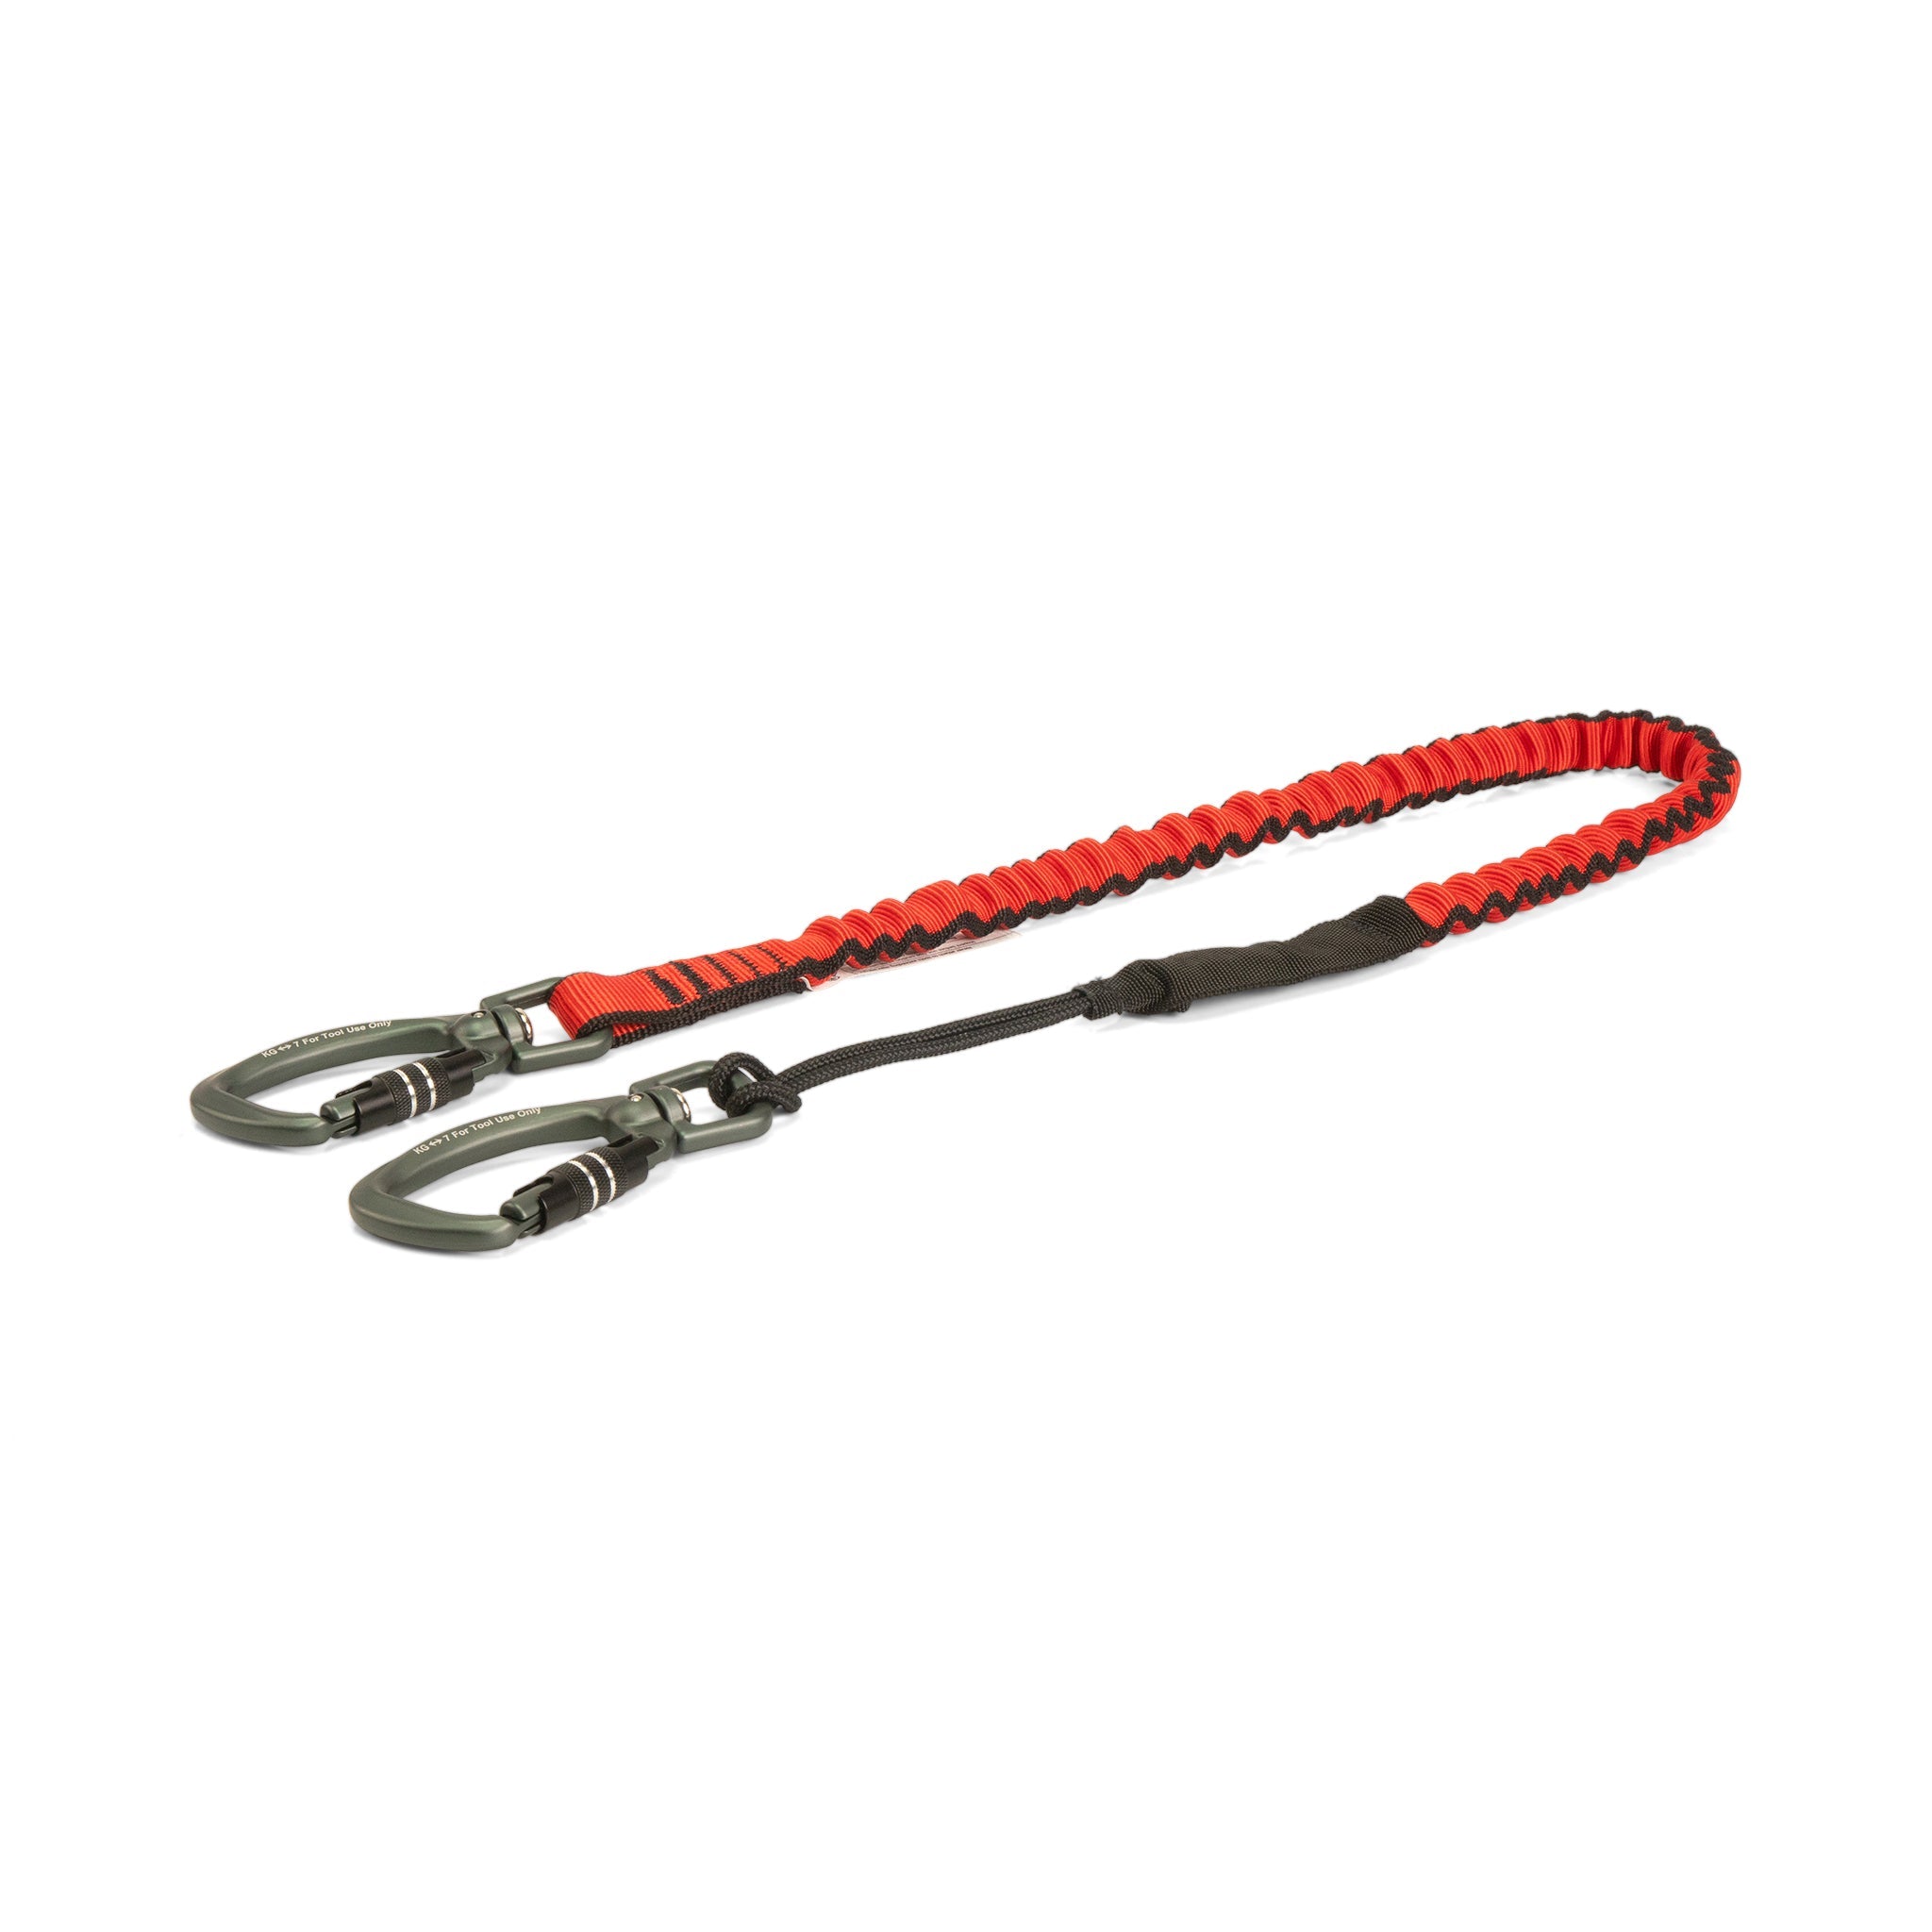 GRIPPS® Bungee Tether Two Dual-Action Swivel Carabiners - 7.0kg / 15lb